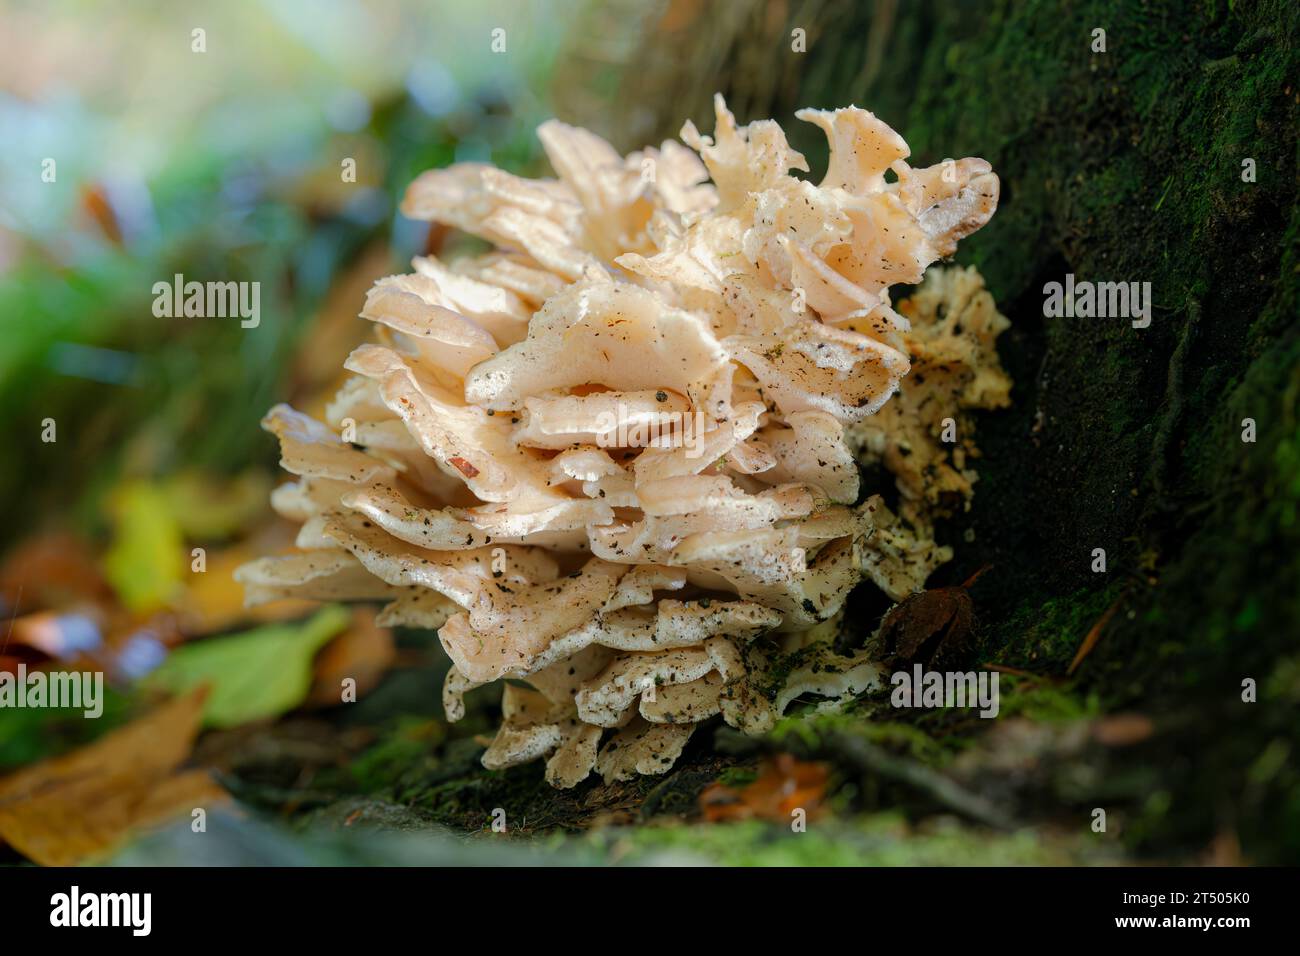 Old Park Tree Infested with bracket Fungus Parasite Growing on Bark Side Stock Photo